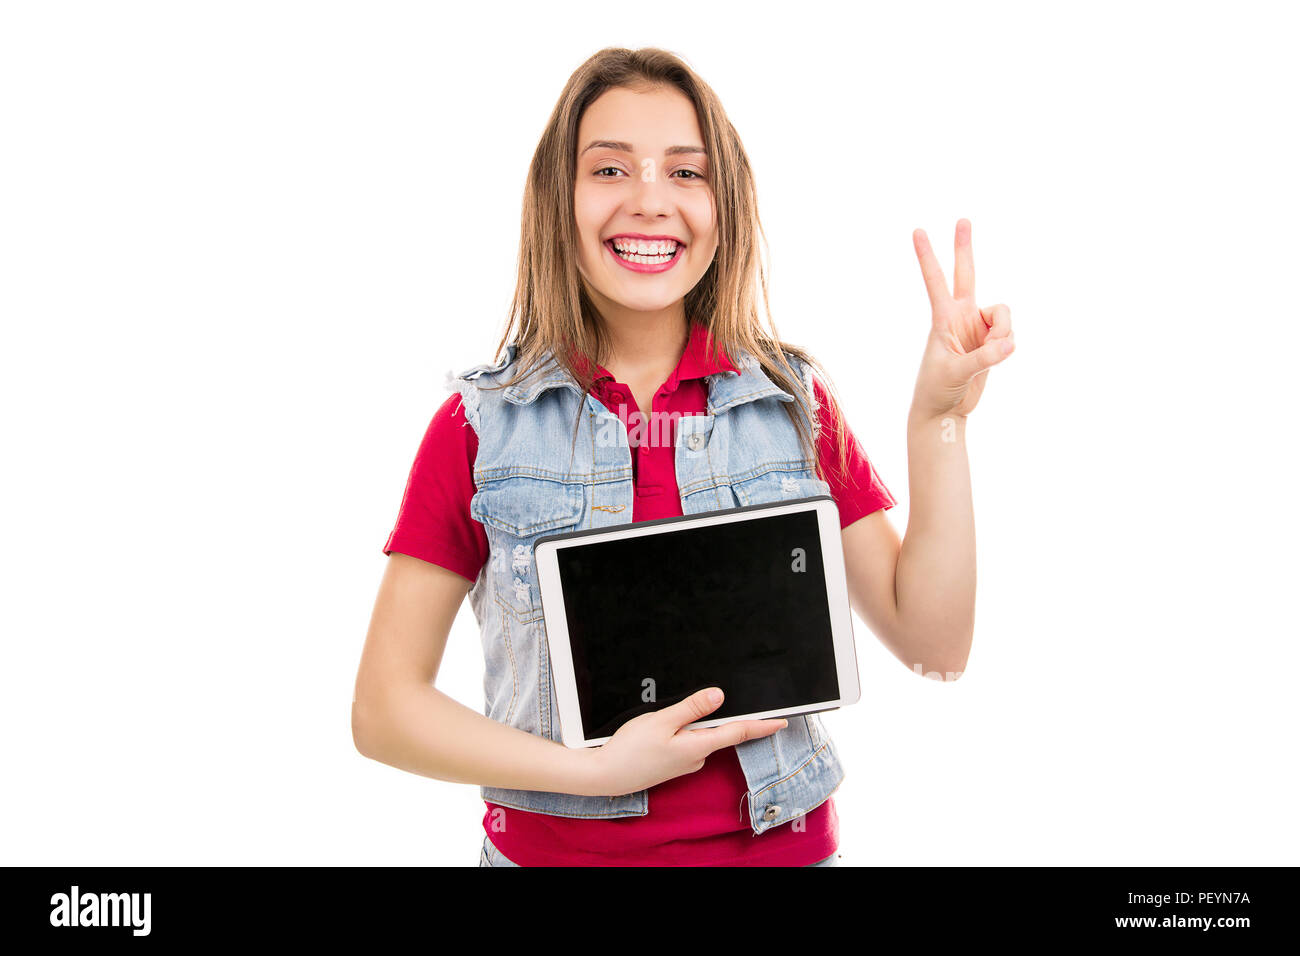 Stylish young woman showing two fingers while demonstrating modern tablet isolated on white background Stock Photo